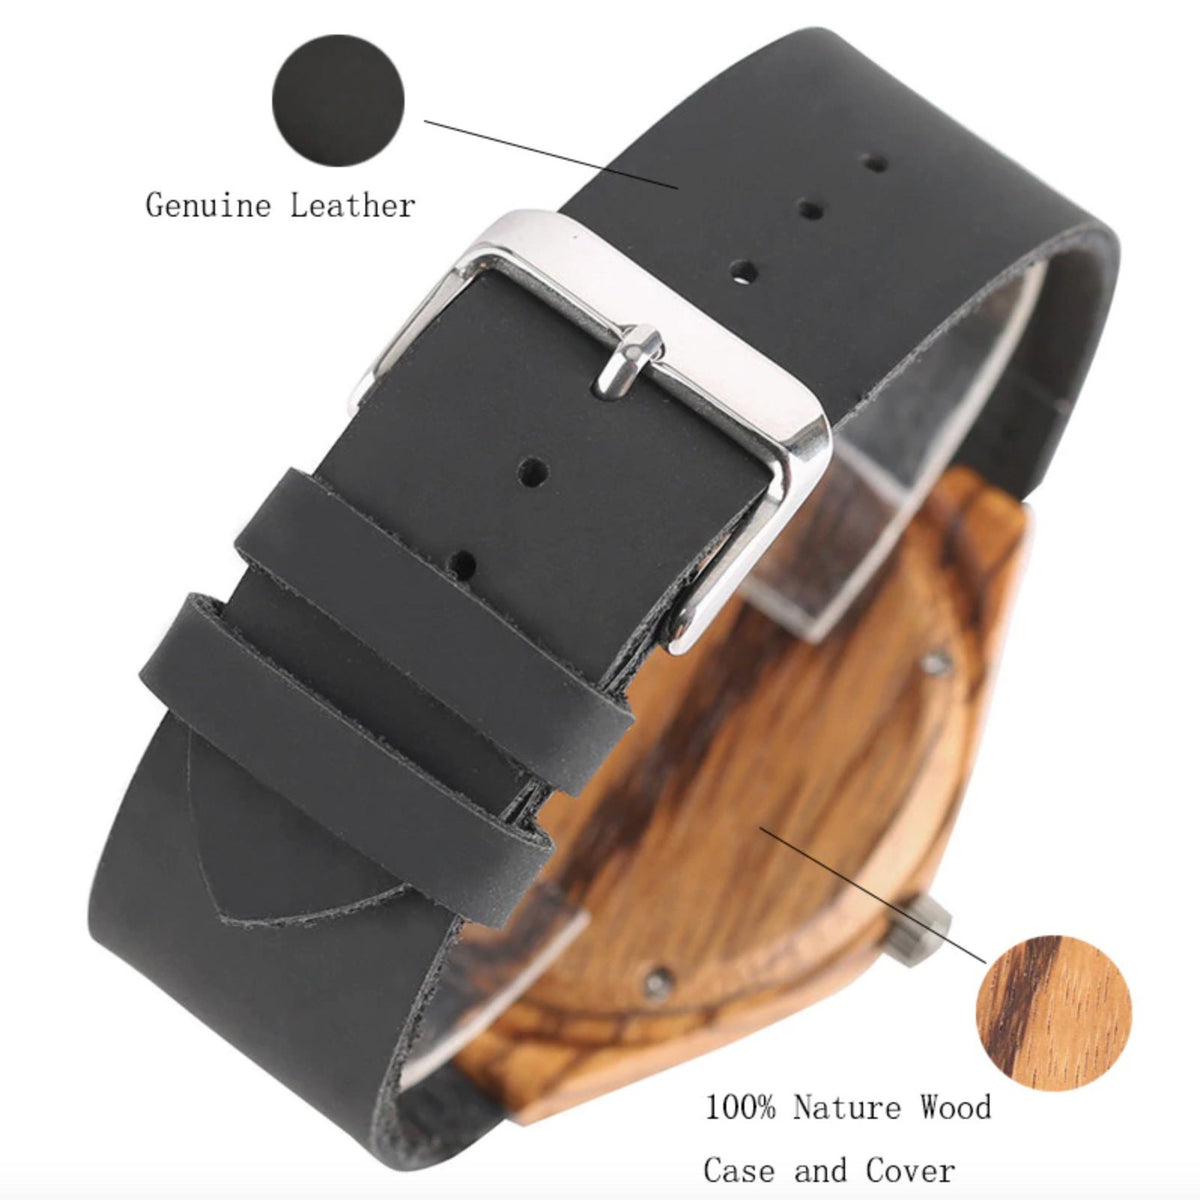 To My Son - I Wish You the Strength to Face Challenges with Confidence - Wooden Watch